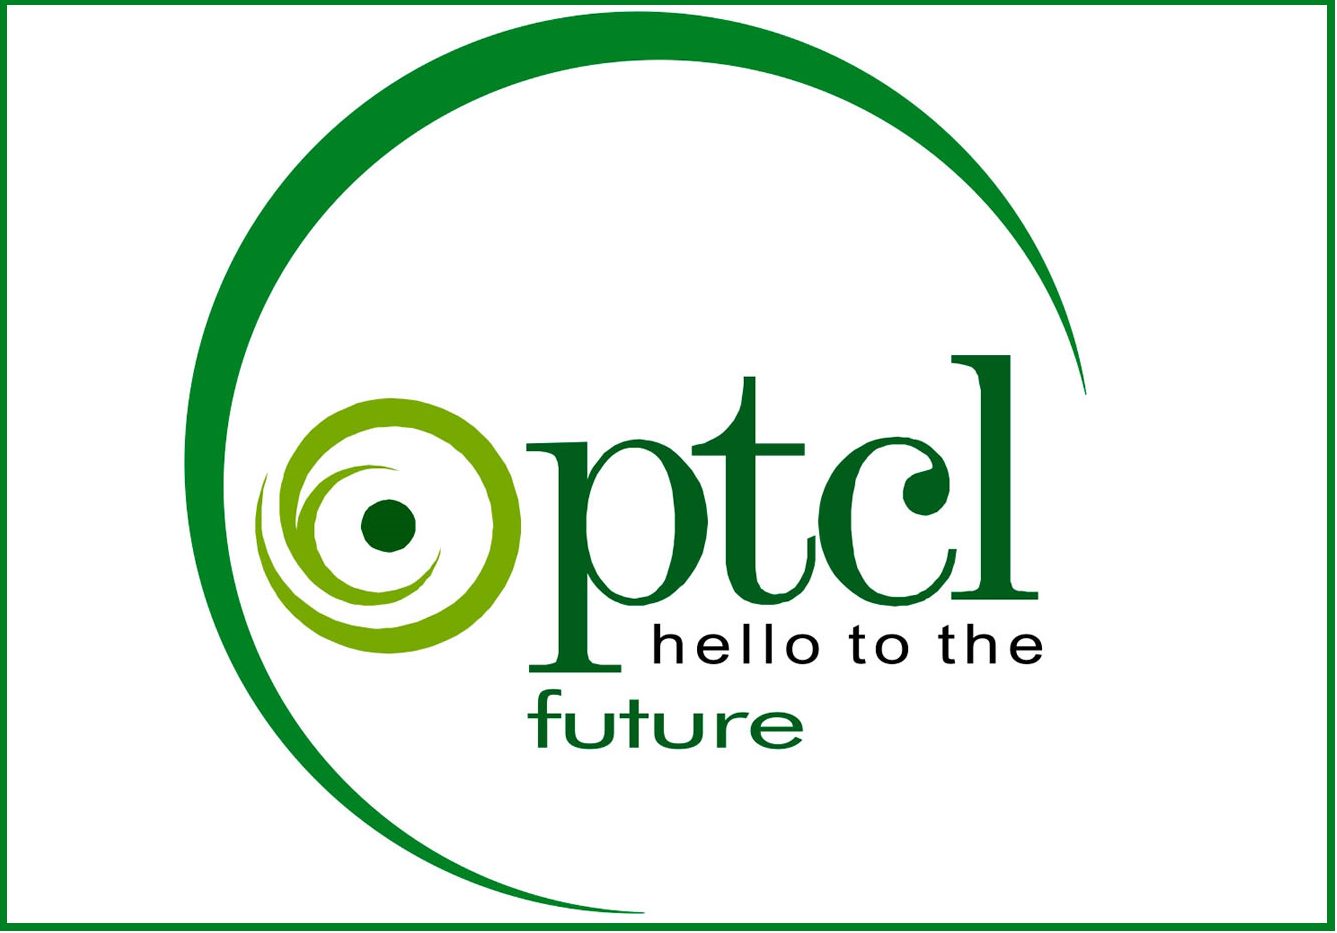 PTCL, the largest ICT services provider in the country has announced expanding its reach to Europe through Sparkle, its long-term partner in the region